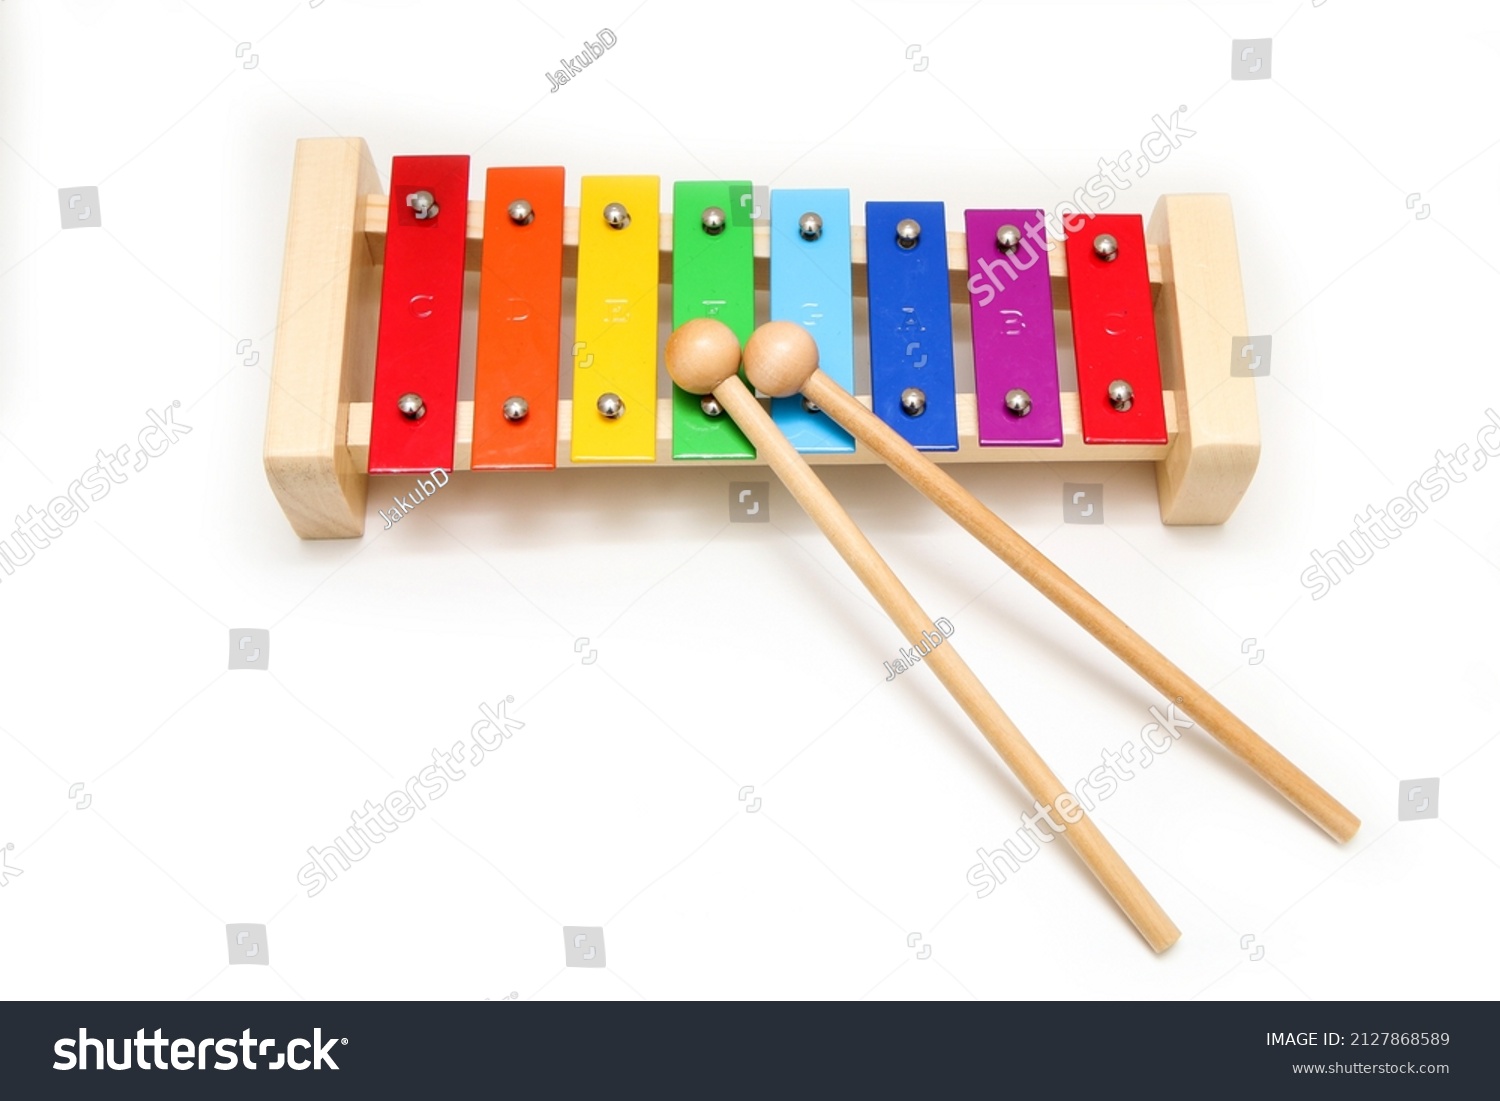 The basic xylophone for children to learn to play simple music. Isolated in a white background.  #2127868589